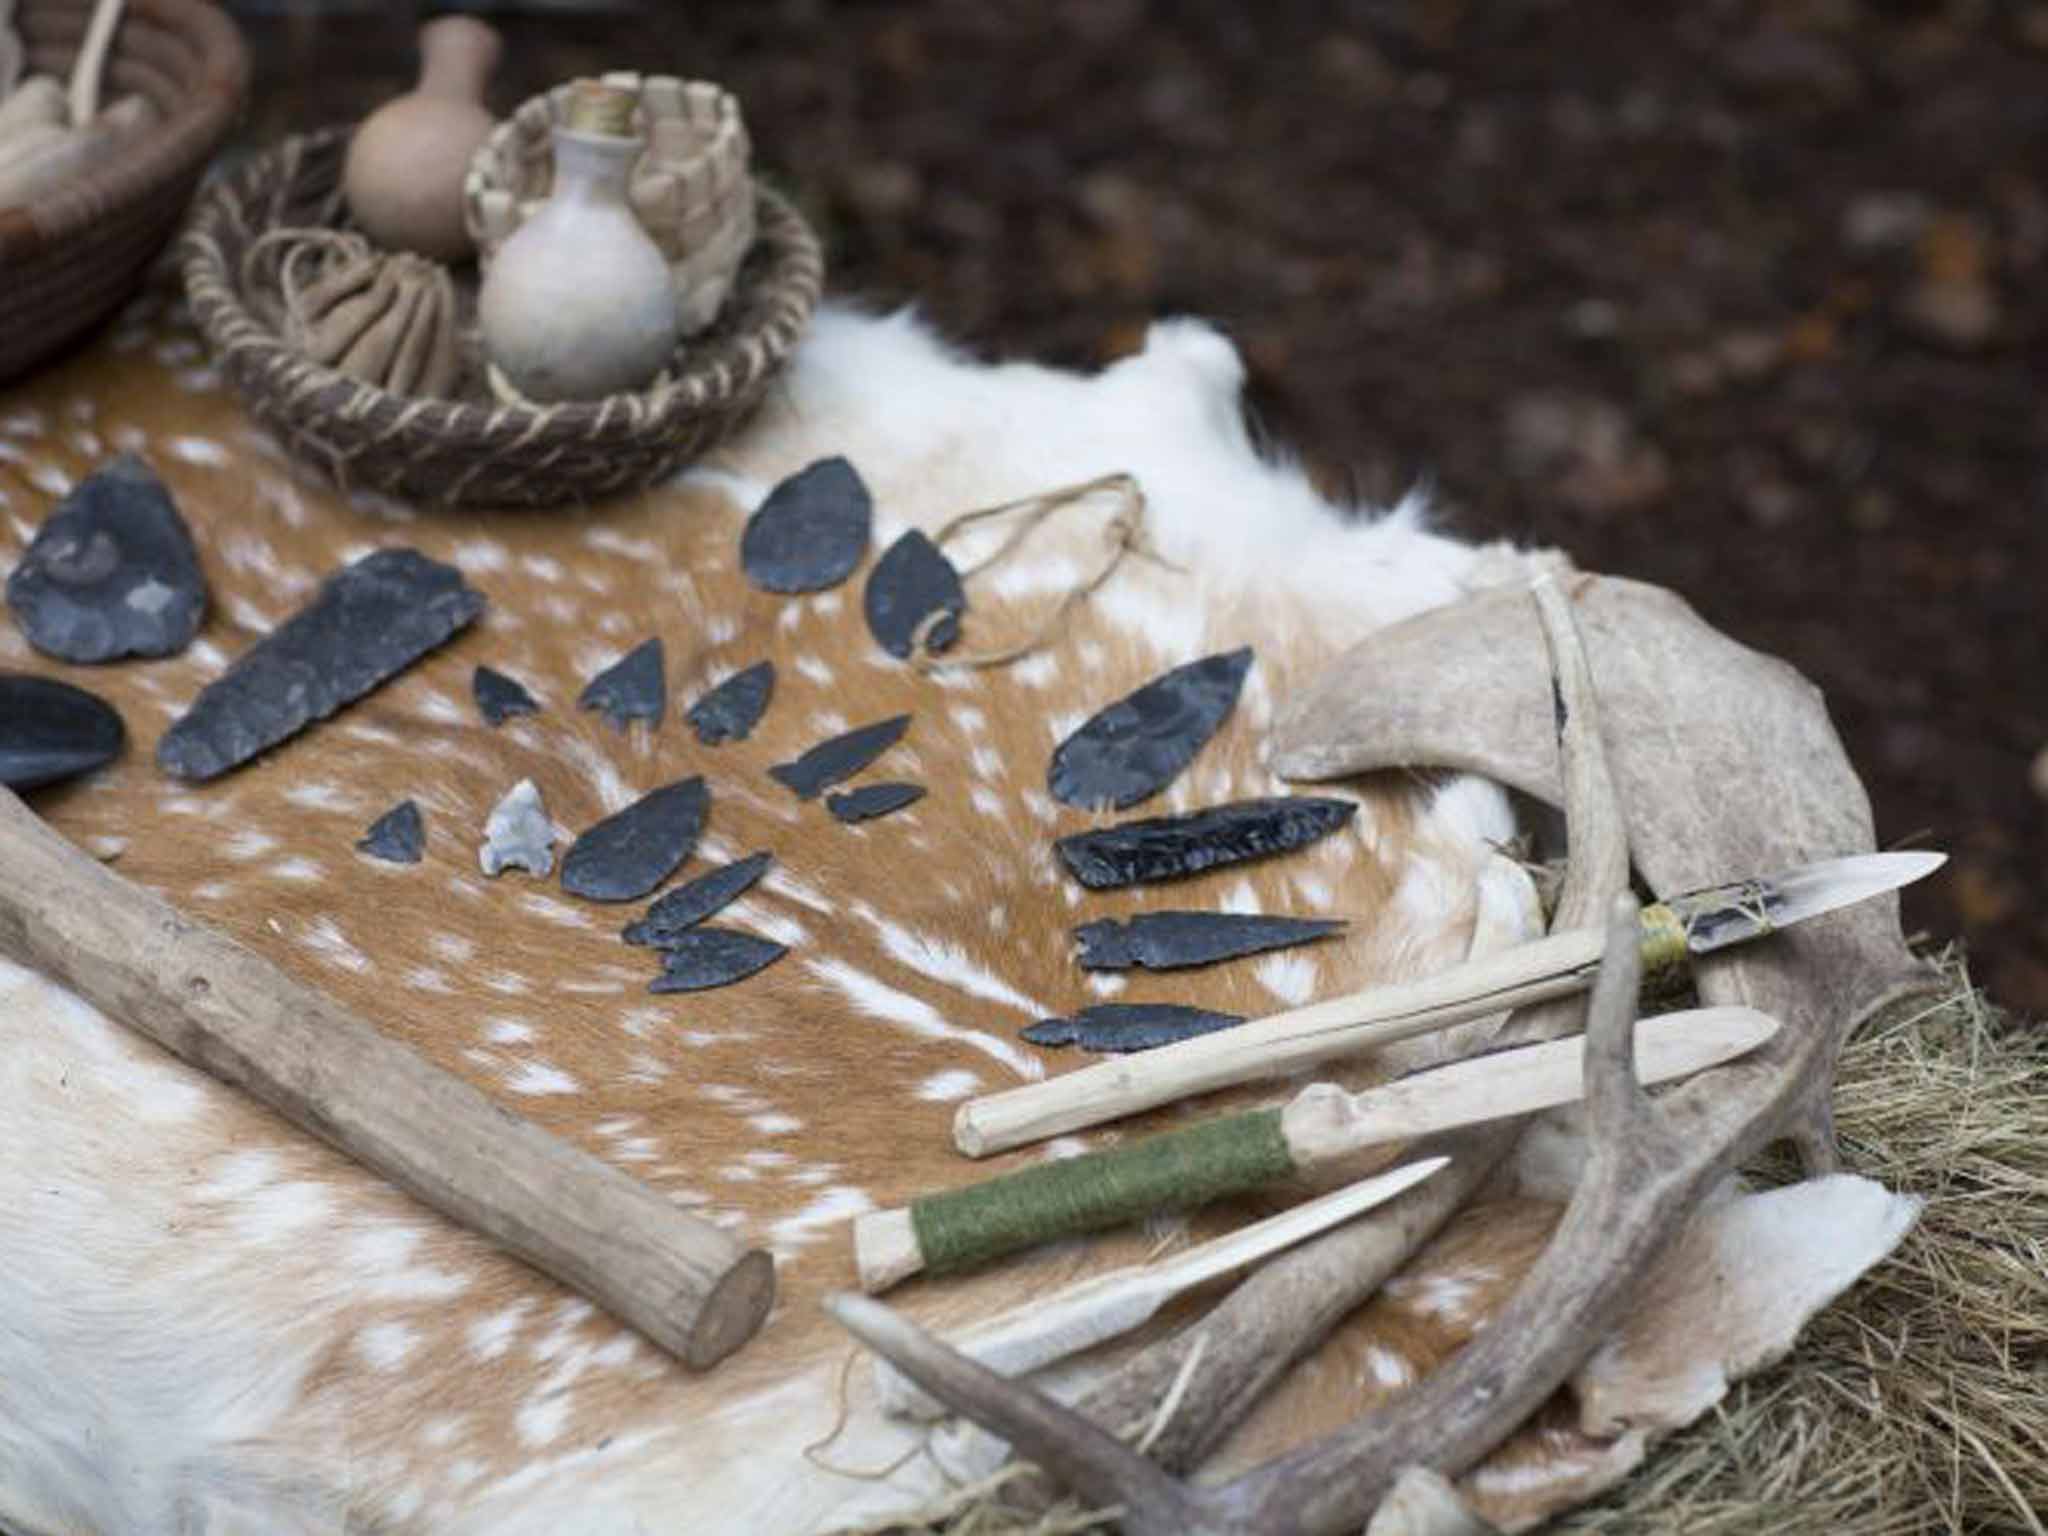 Cut and thrust: Stone Age tools and flint blades arranged on an animal pelt